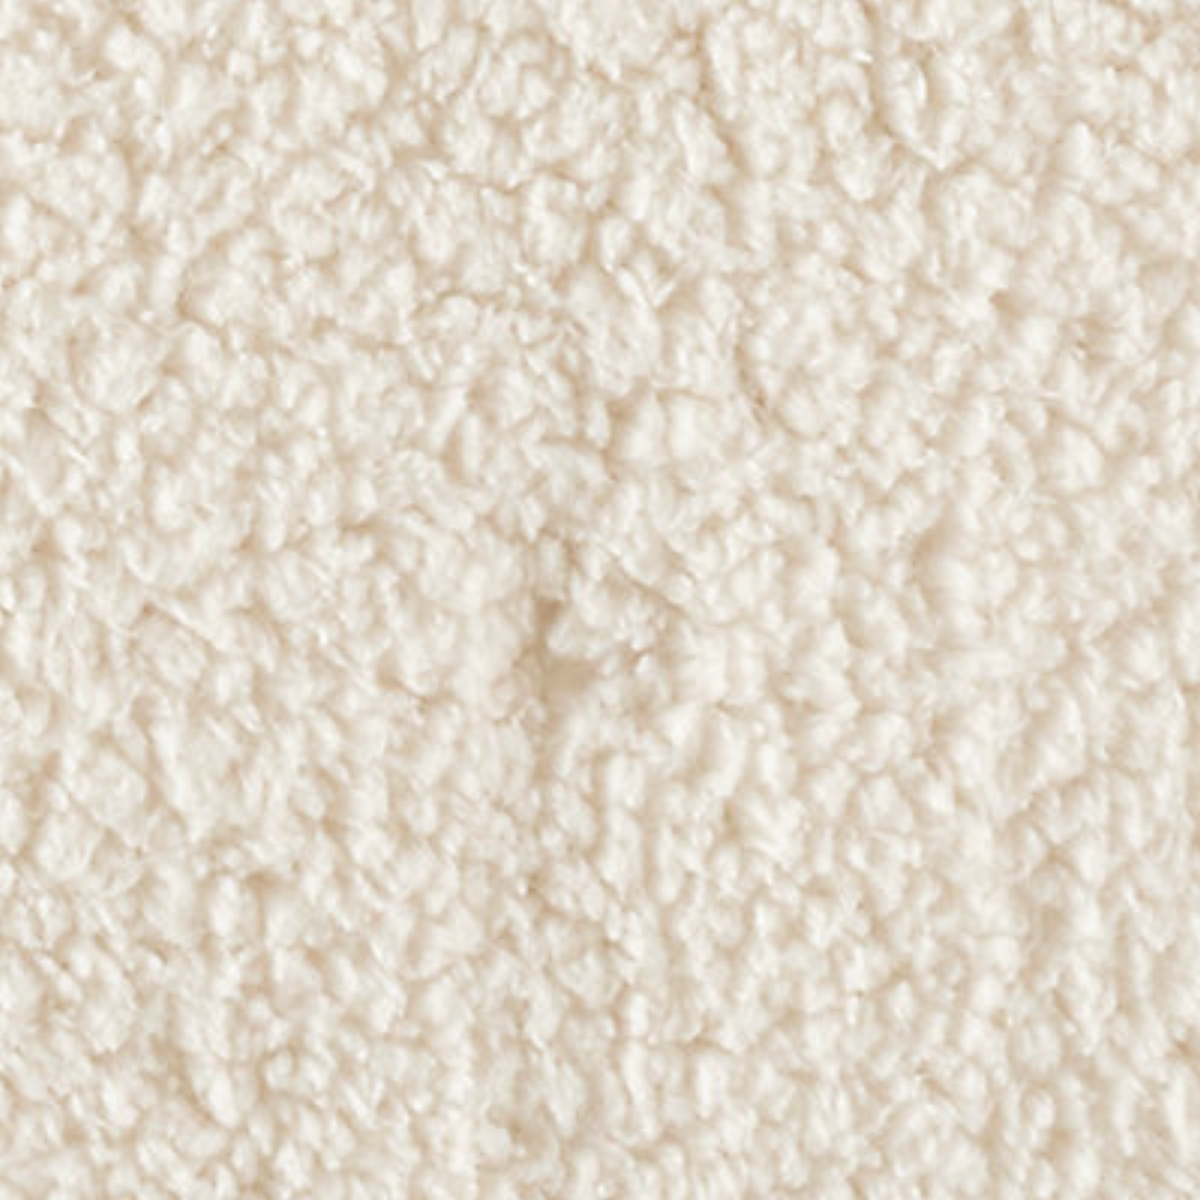 Swatch Sample of Ivory Pine Cone Hill Marshmallow Fleece Bedding